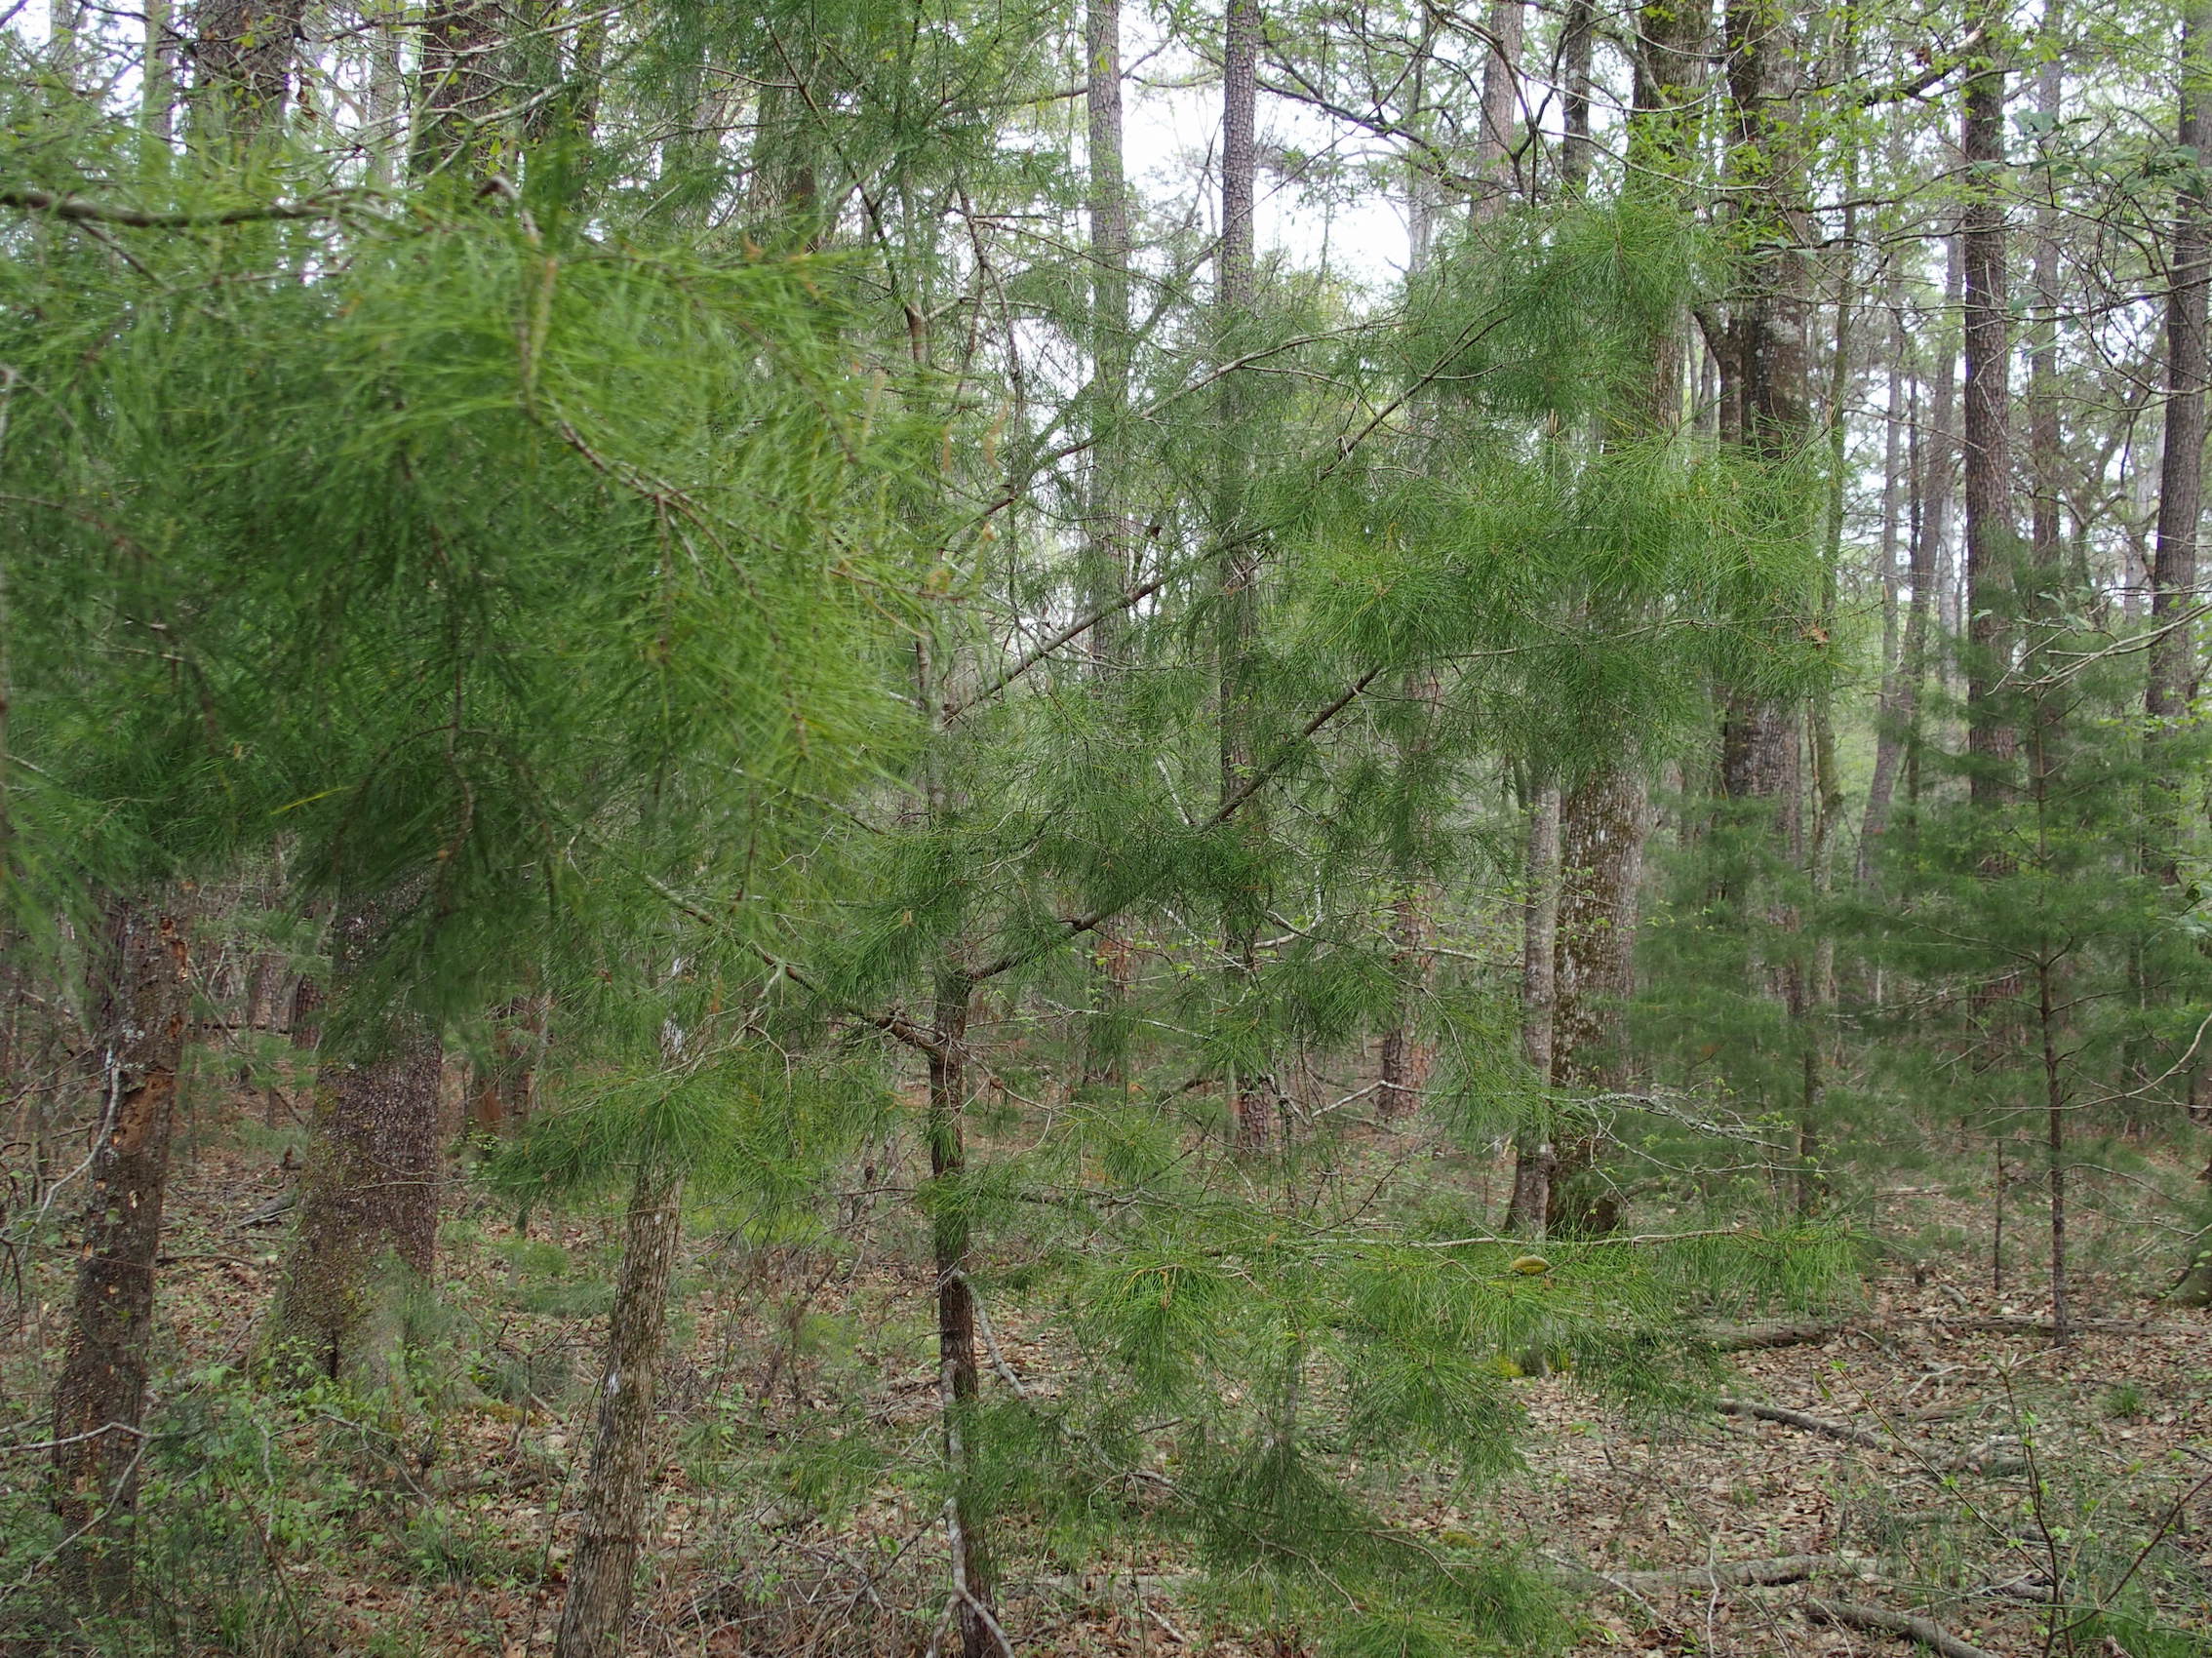 The Scientific Name is Pinus glabra. You will likely hear them called Spruce Pine, Walter's Pine. This picture shows the Characterized by soft needles and a preference for shade in wet forests of Pinus glabra